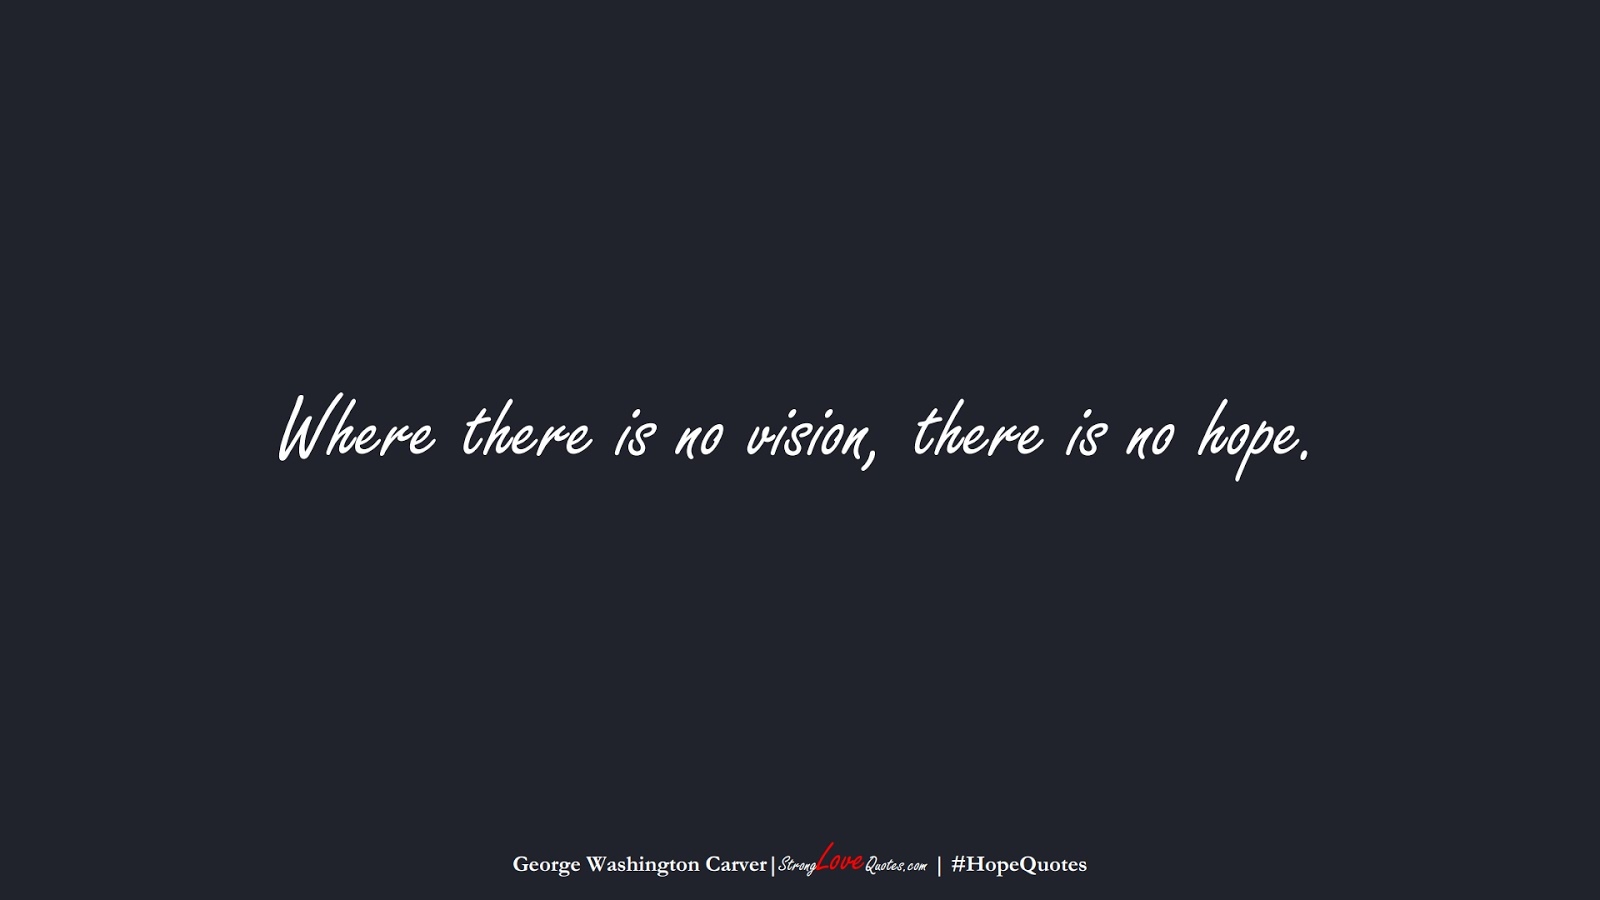 Where there is no vision, there is no hope. (George Washington Carver);  #HopeQuotes